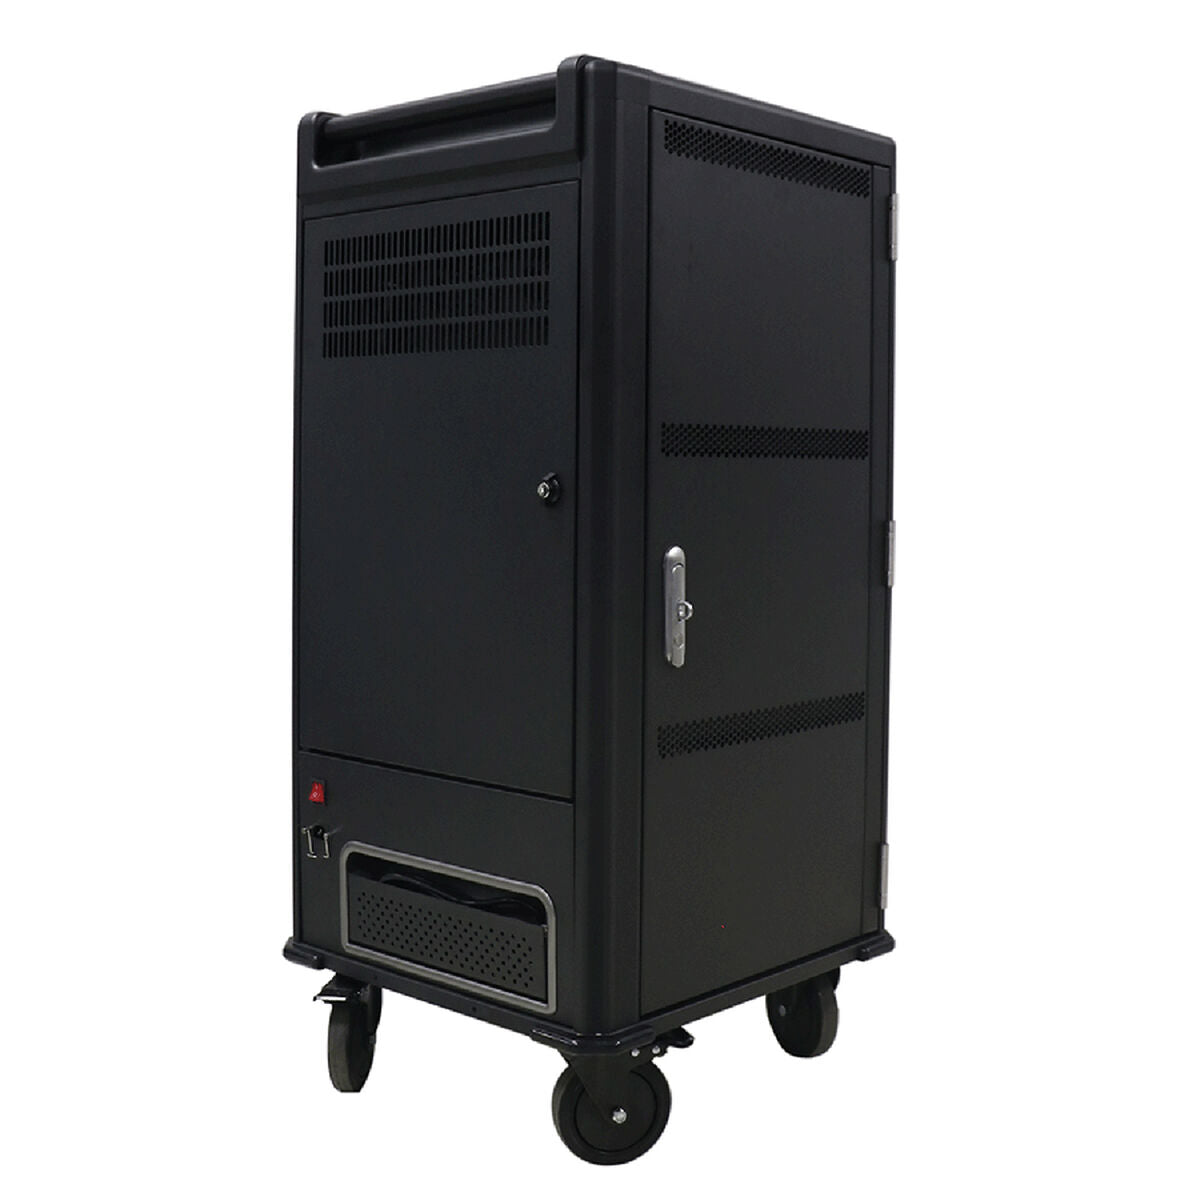 Wall-mounted Rack Cabinet V7 CHGCT30USBCPD-1E, V7, Computing, Accessories, wall-mounted-rack-cabinet-v7-chgct30usbcpd-1e, Brand_V7, category-reference-2609, category-reference-2803, category-reference-2828, category-reference-t-19685, category-reference-t-19908, Condition_NEW, furniture, networks/wiring, organisation, Price_+ 1000, Teleworking, RiotNook